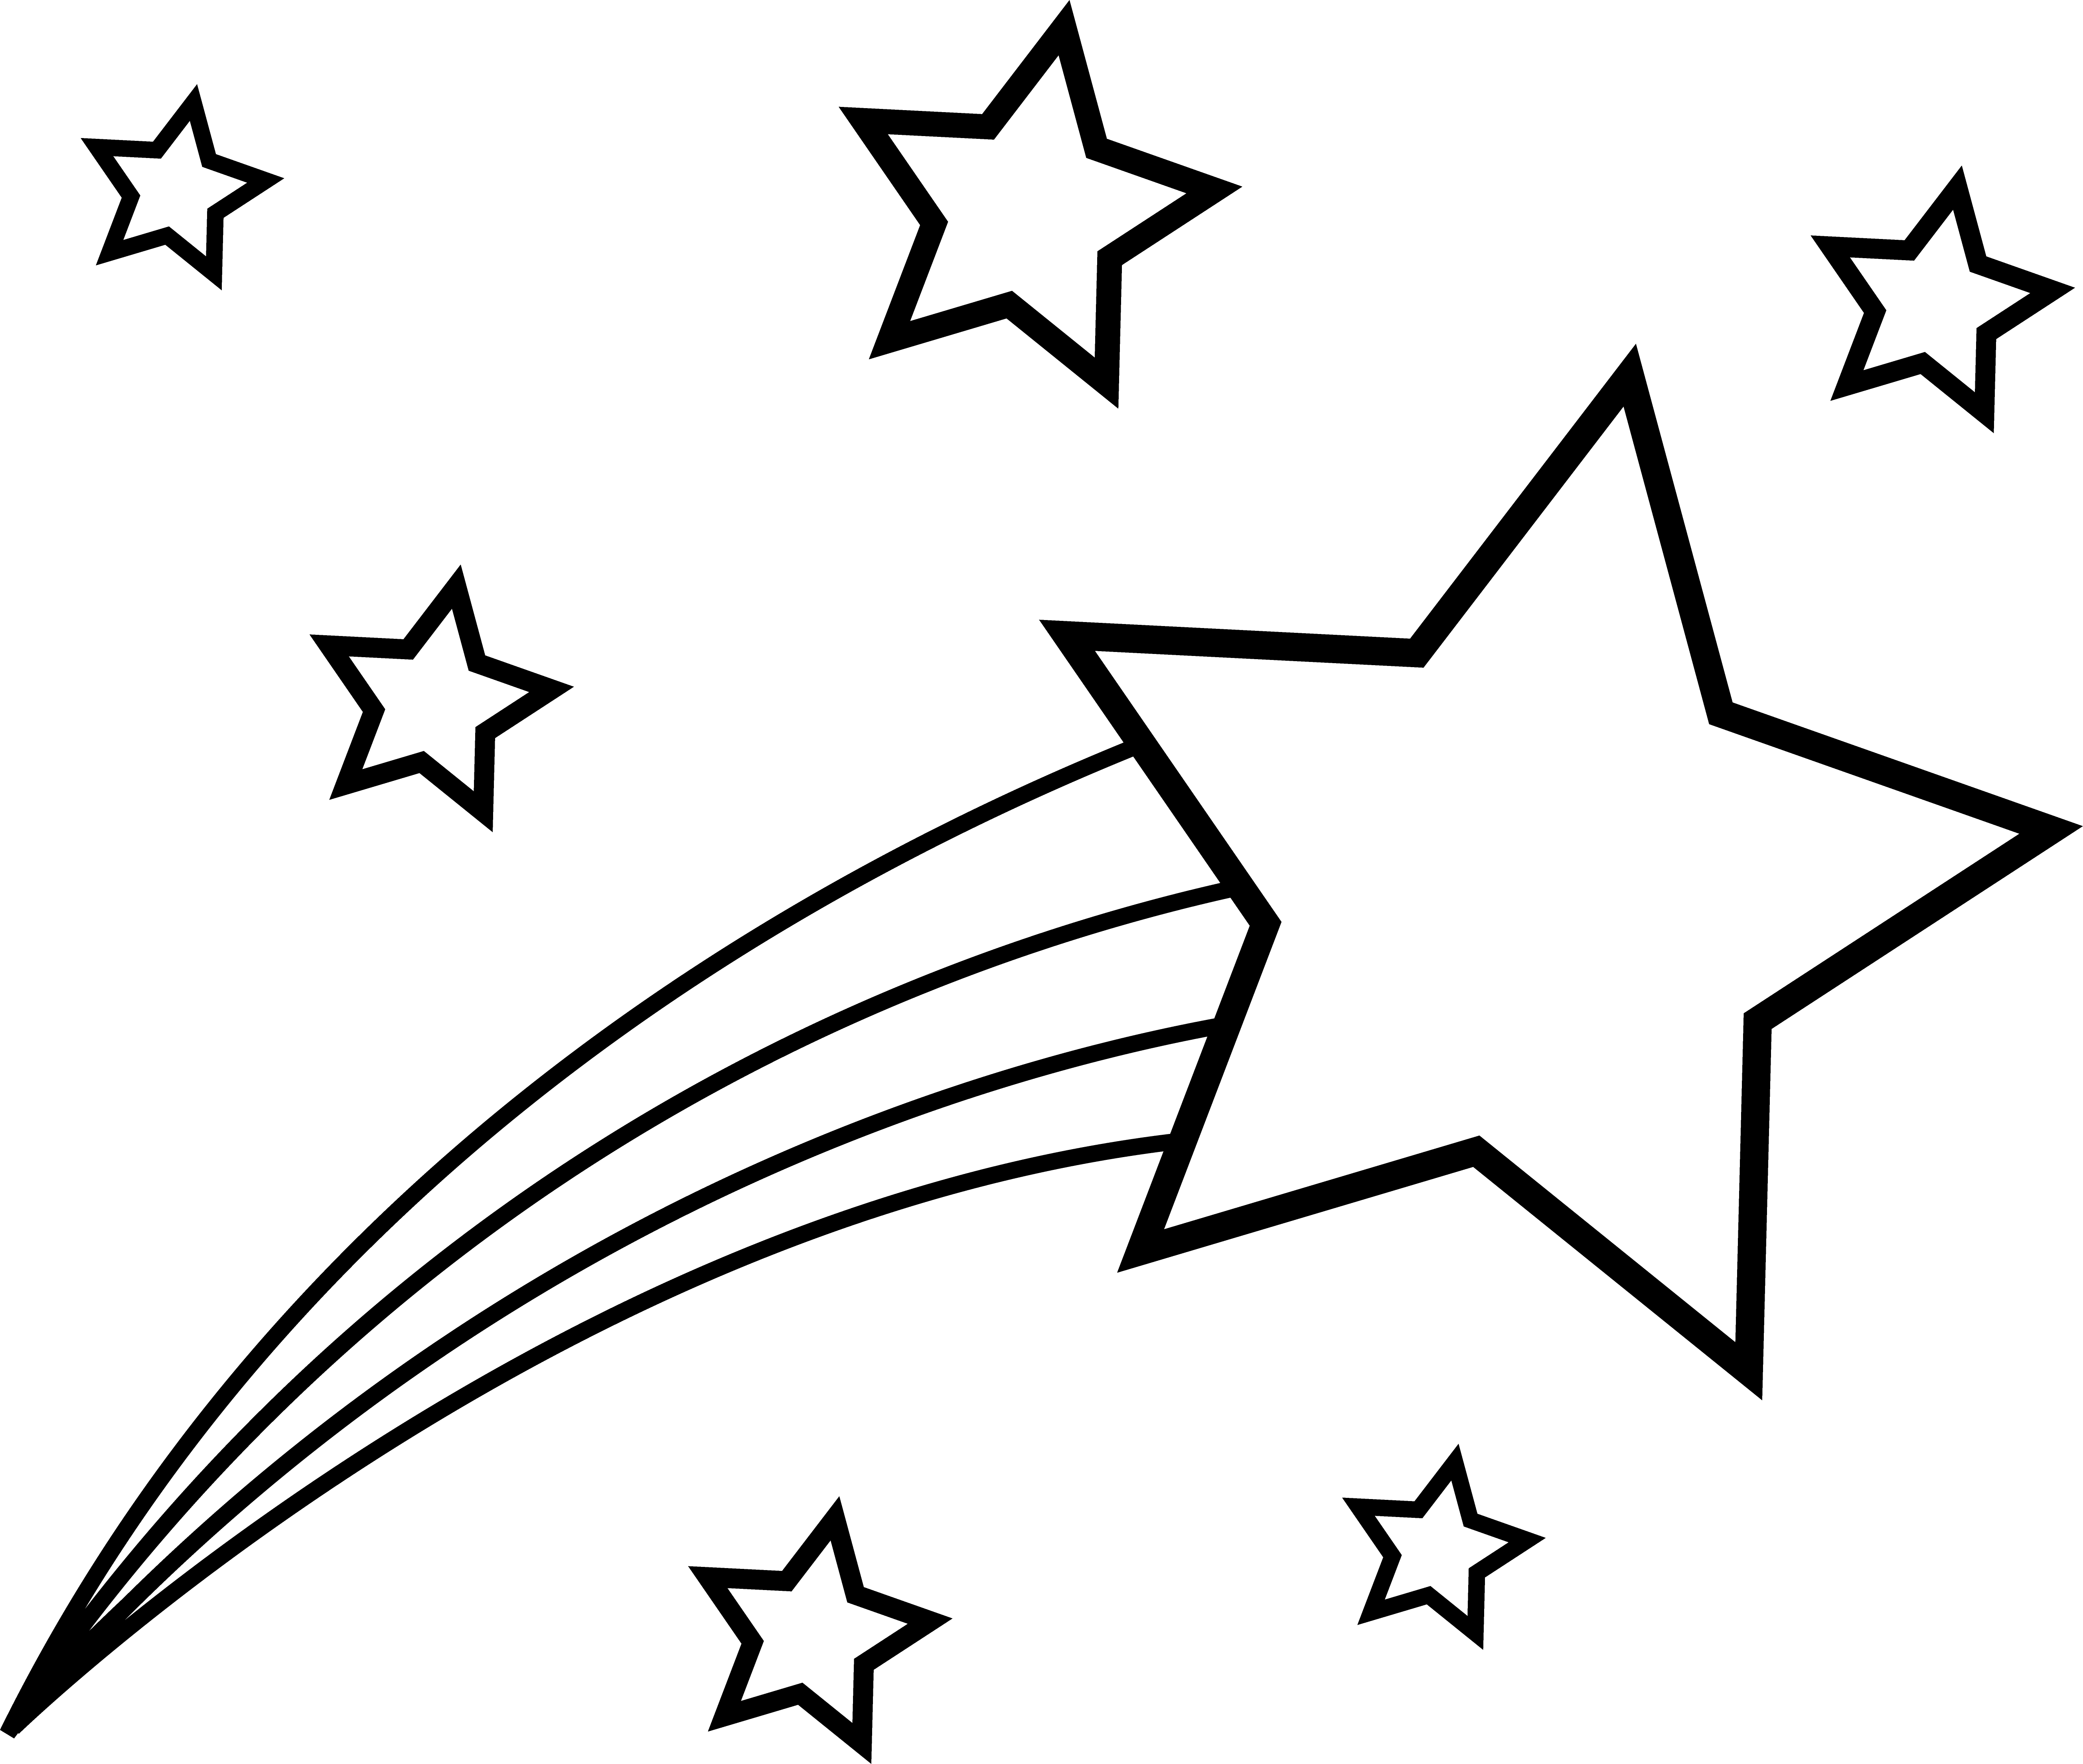 Shooting Star Drawing - ClipArt Best